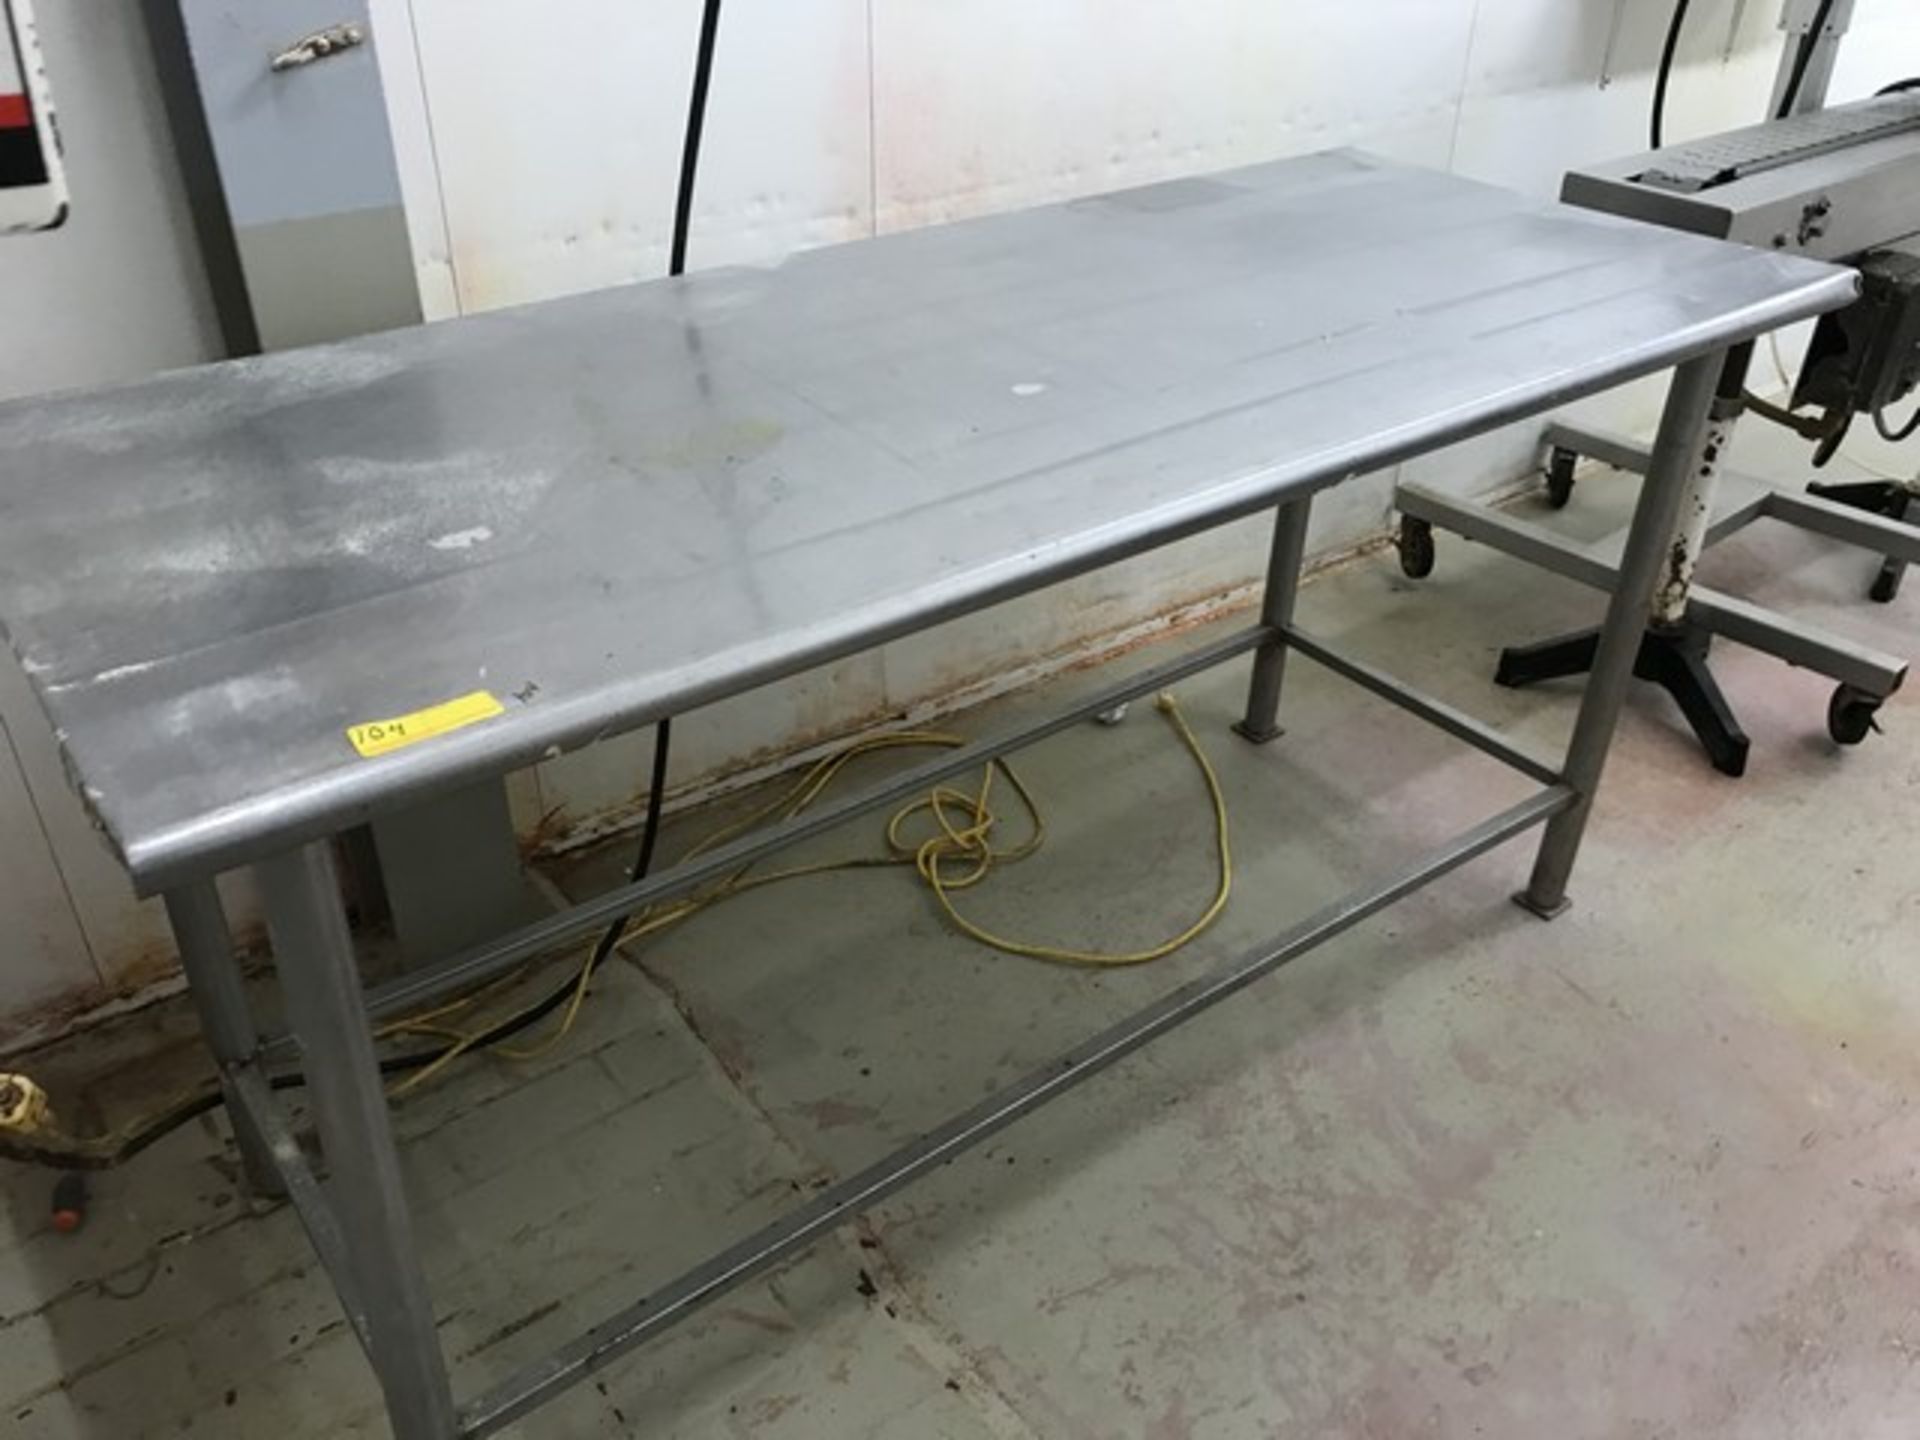 STAINLESS STEEL TABLE - APPROXIMATELY 6'